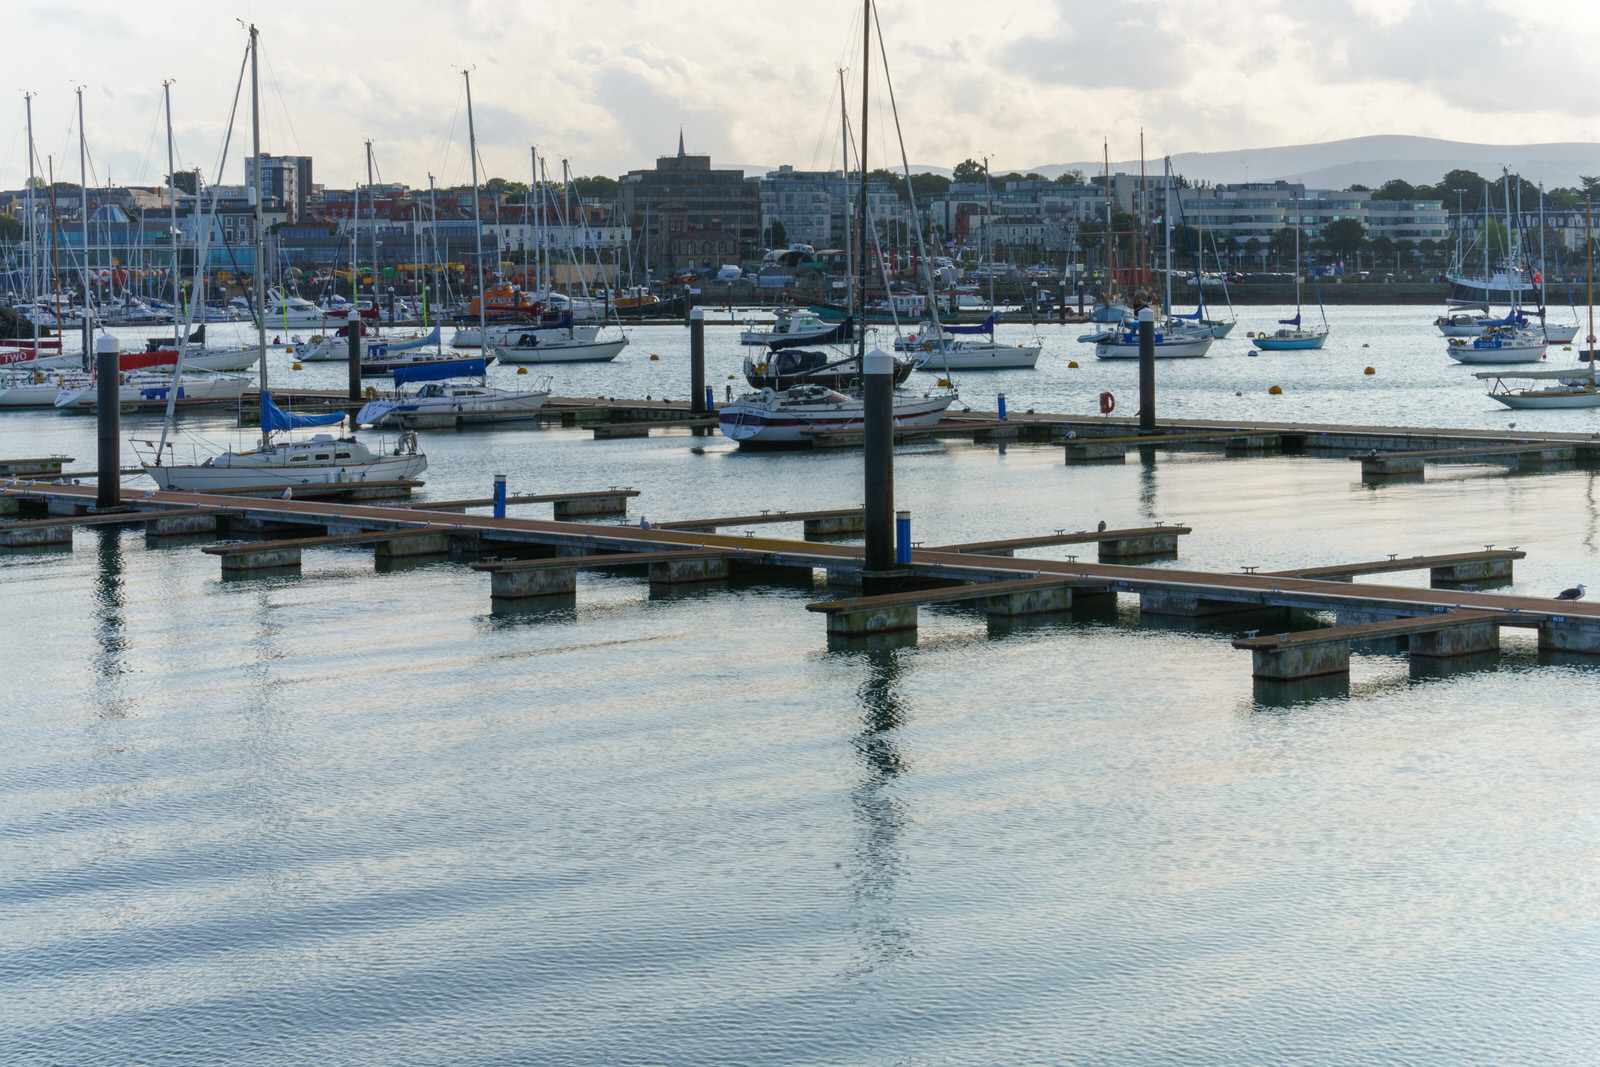 THE SECTION OF THE MARINA NEAR THE WESTERN BREAKWATER [DUN LAOGHAIRE HARBOUR]
 010